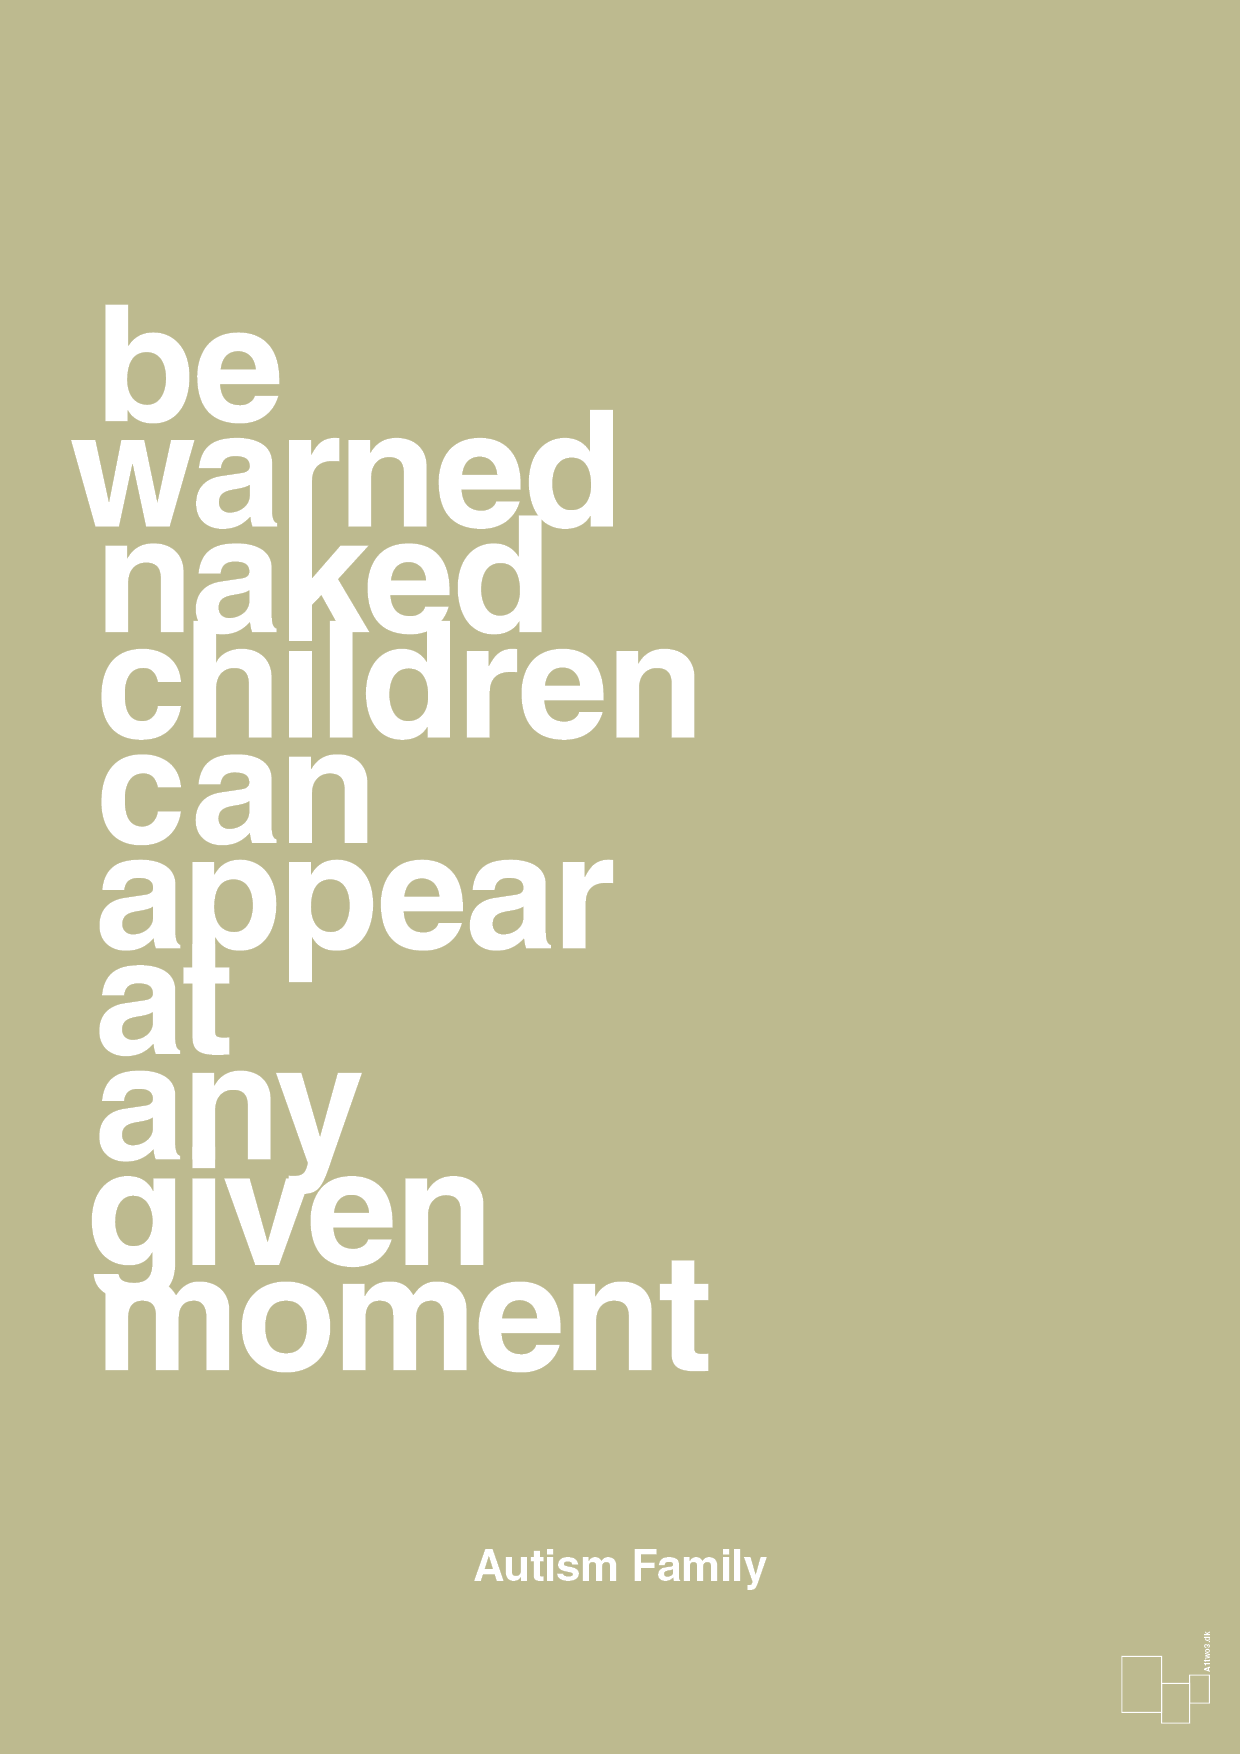 be warned naked children can appear at any given moment - Plakat med Samfund i Back to Nature